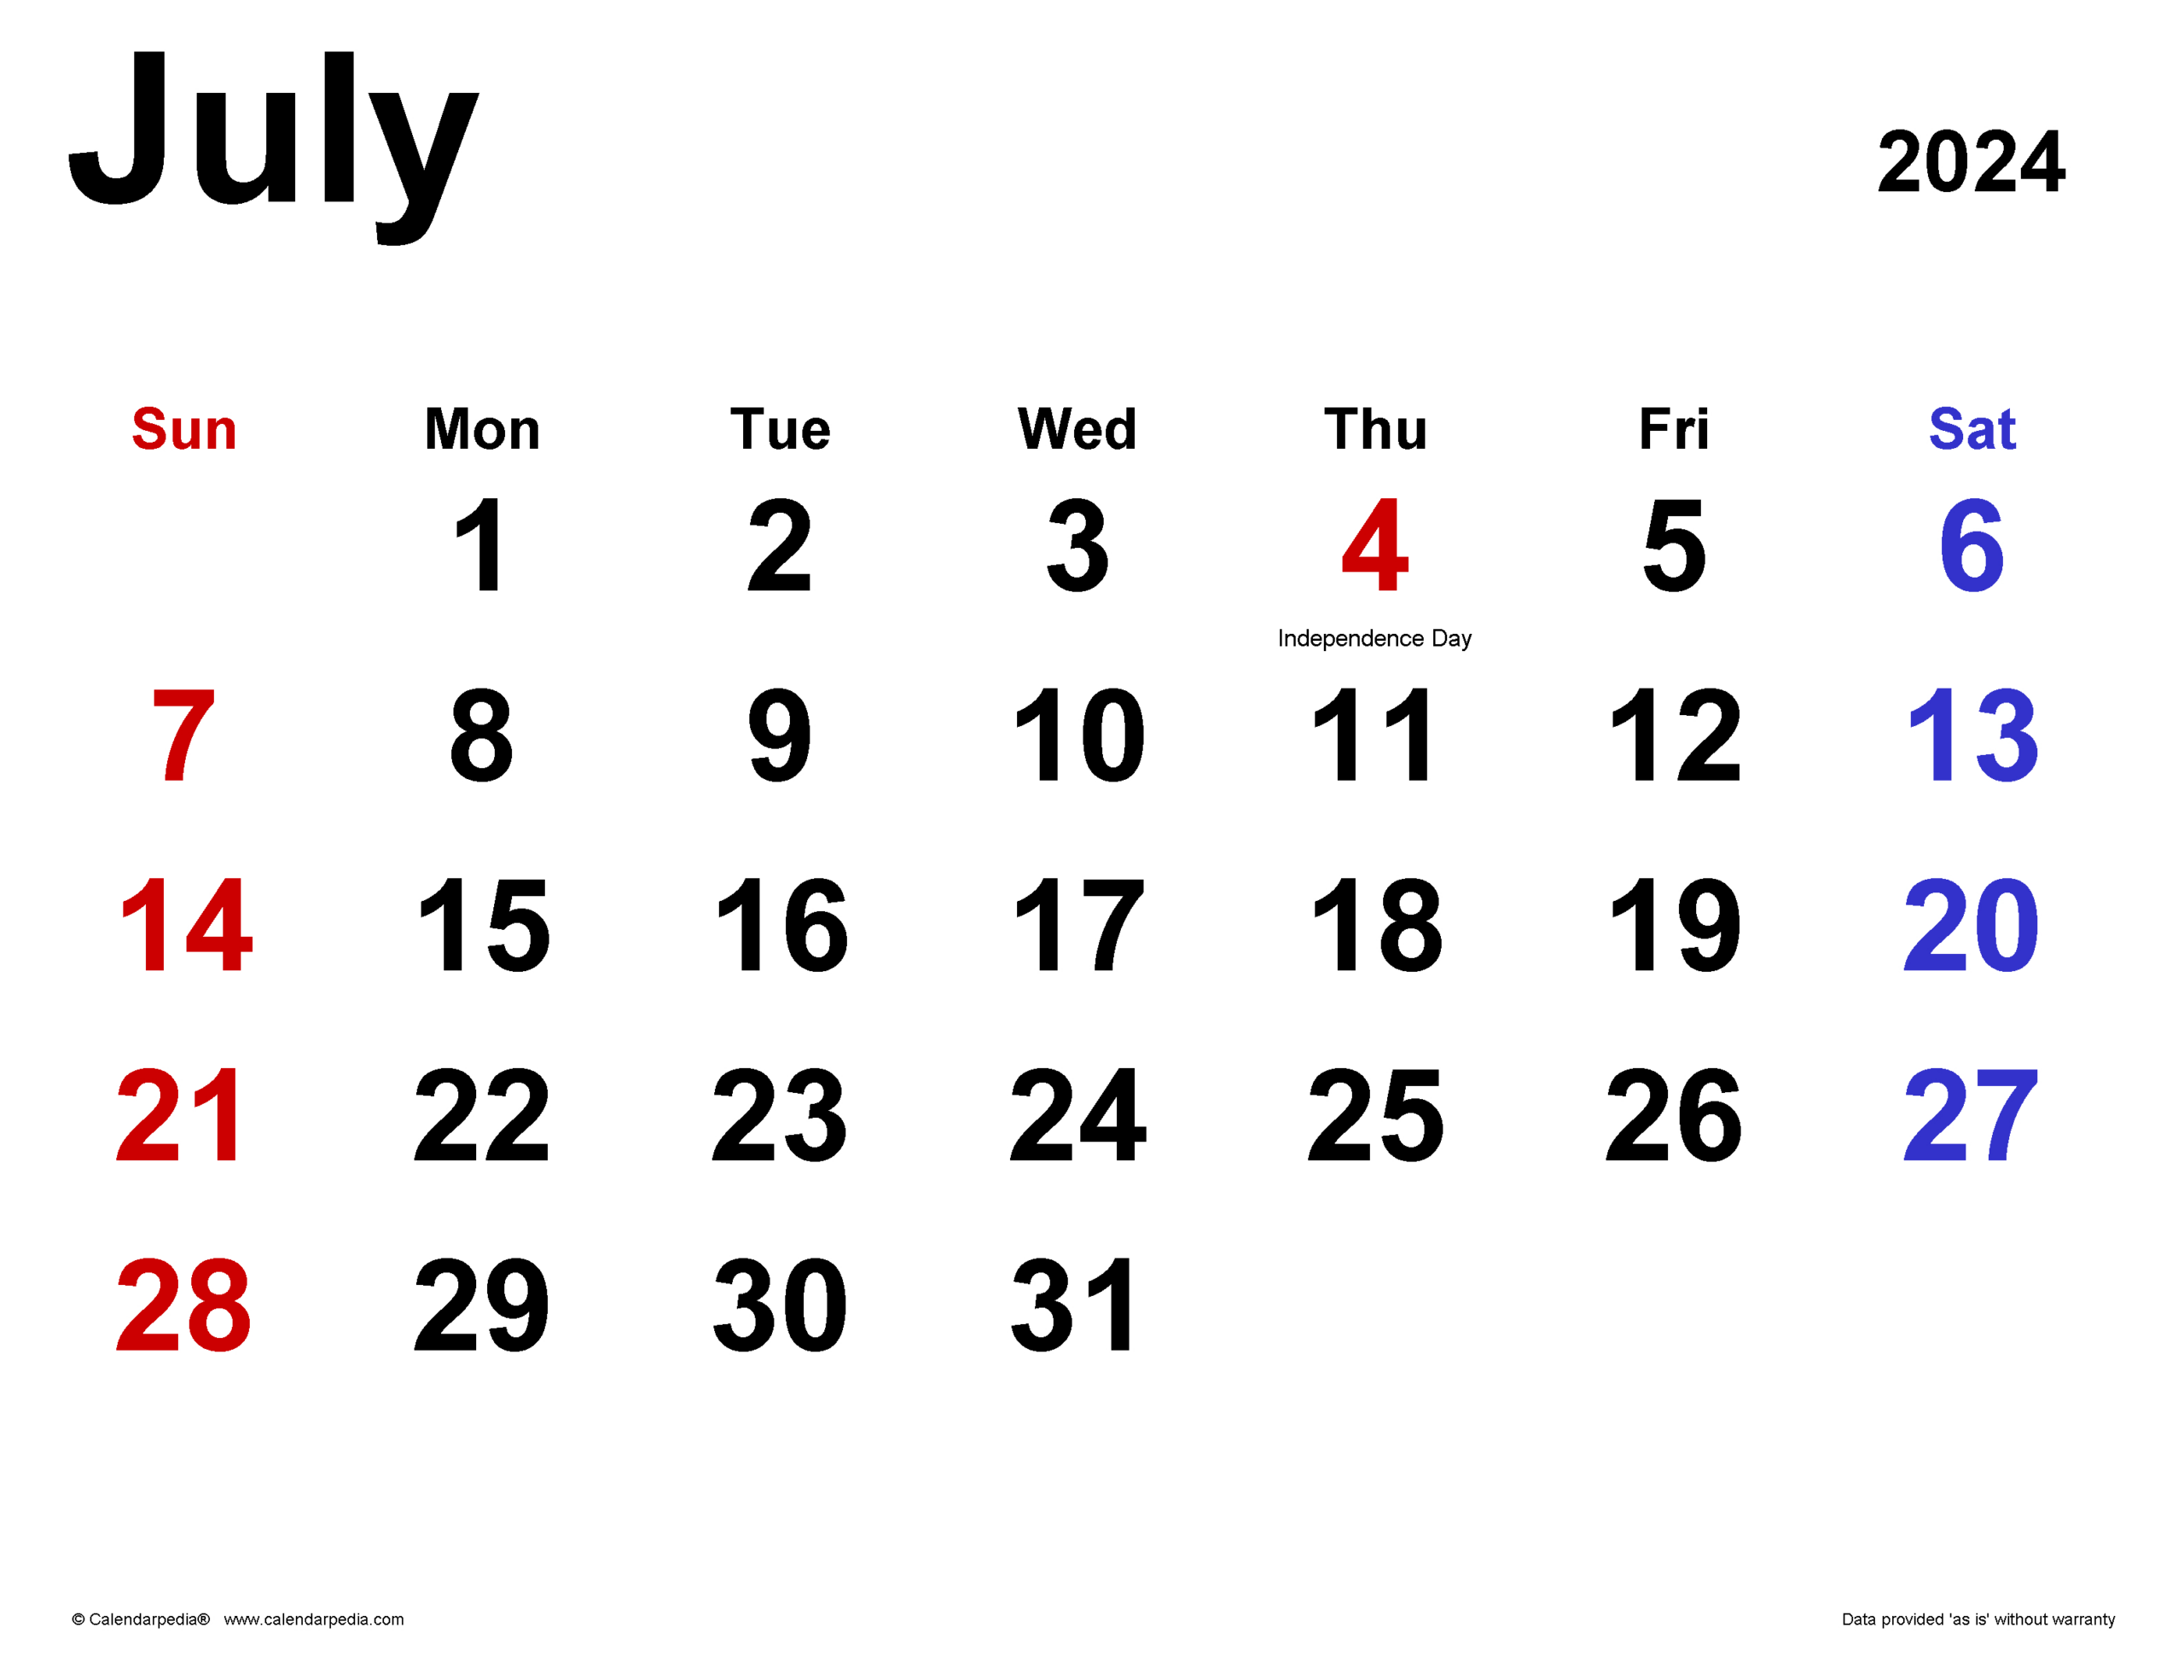 July 2024 Calendar | Templates For Word, Excel And Pdf with regard to July 2024 Calendar in Word